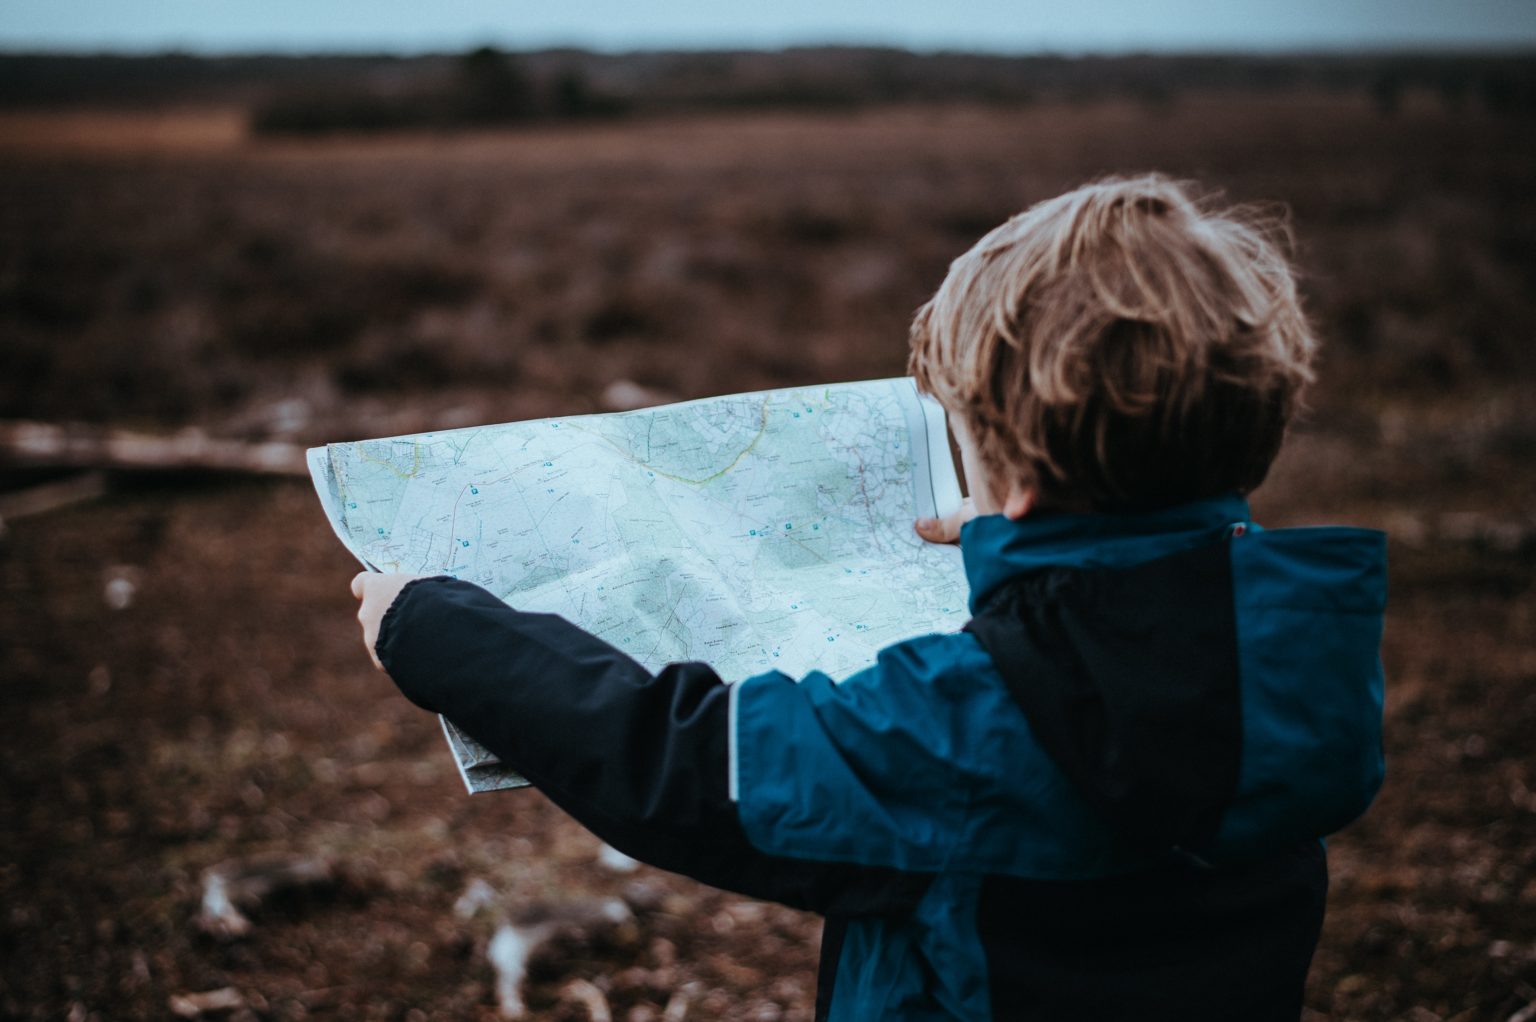 A child standing and holding a map